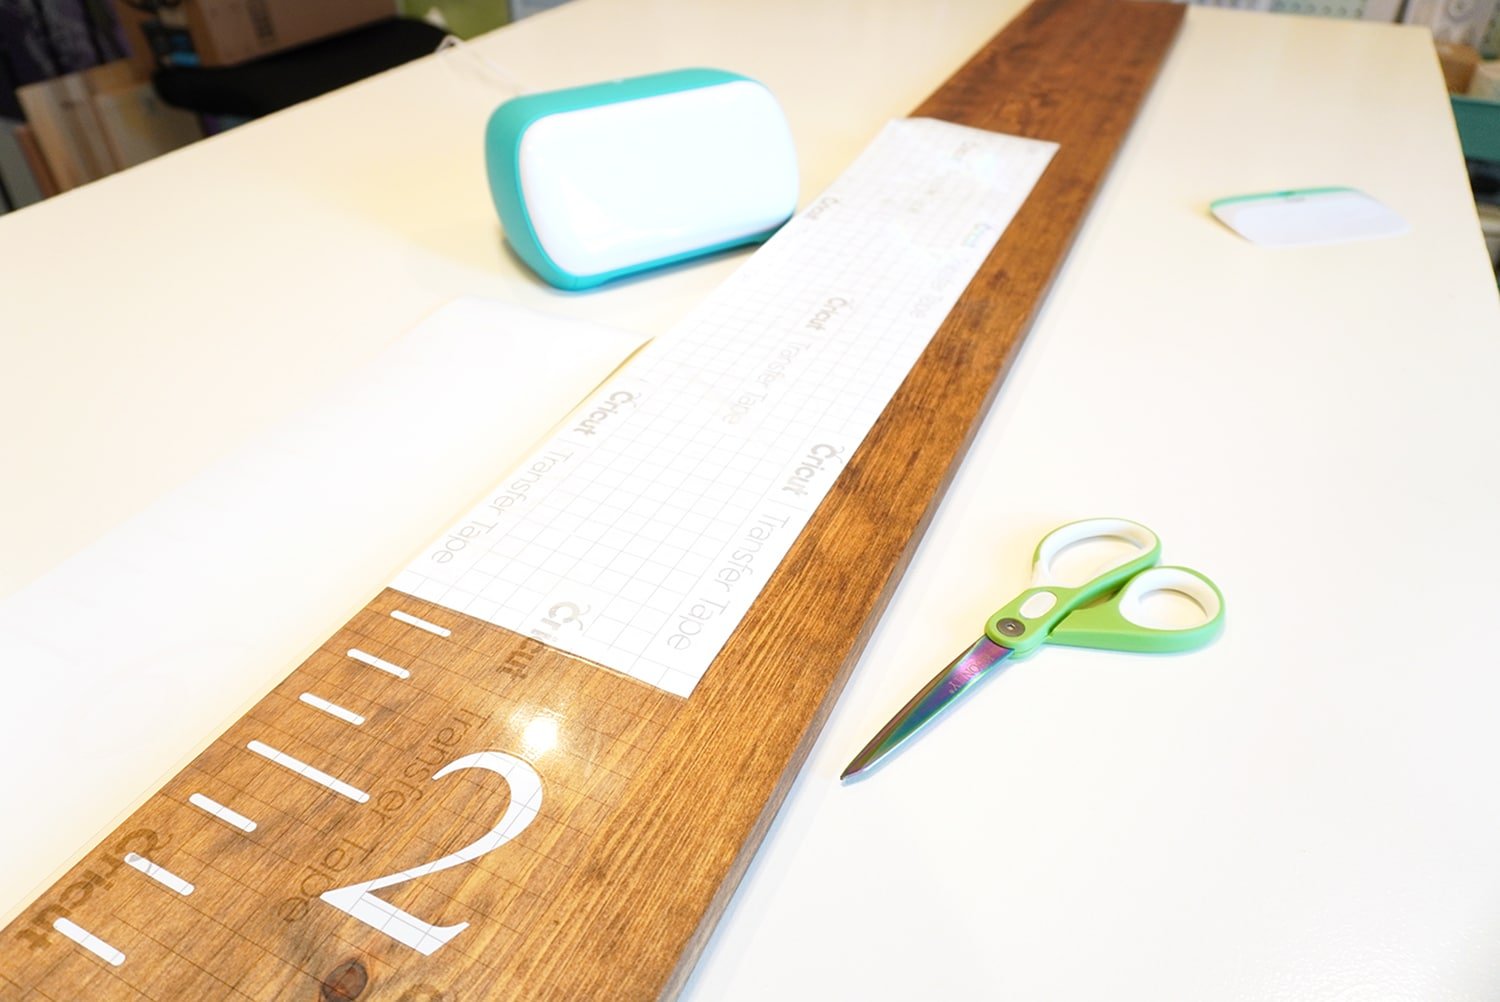 supplies for making Iiy growth chart on table